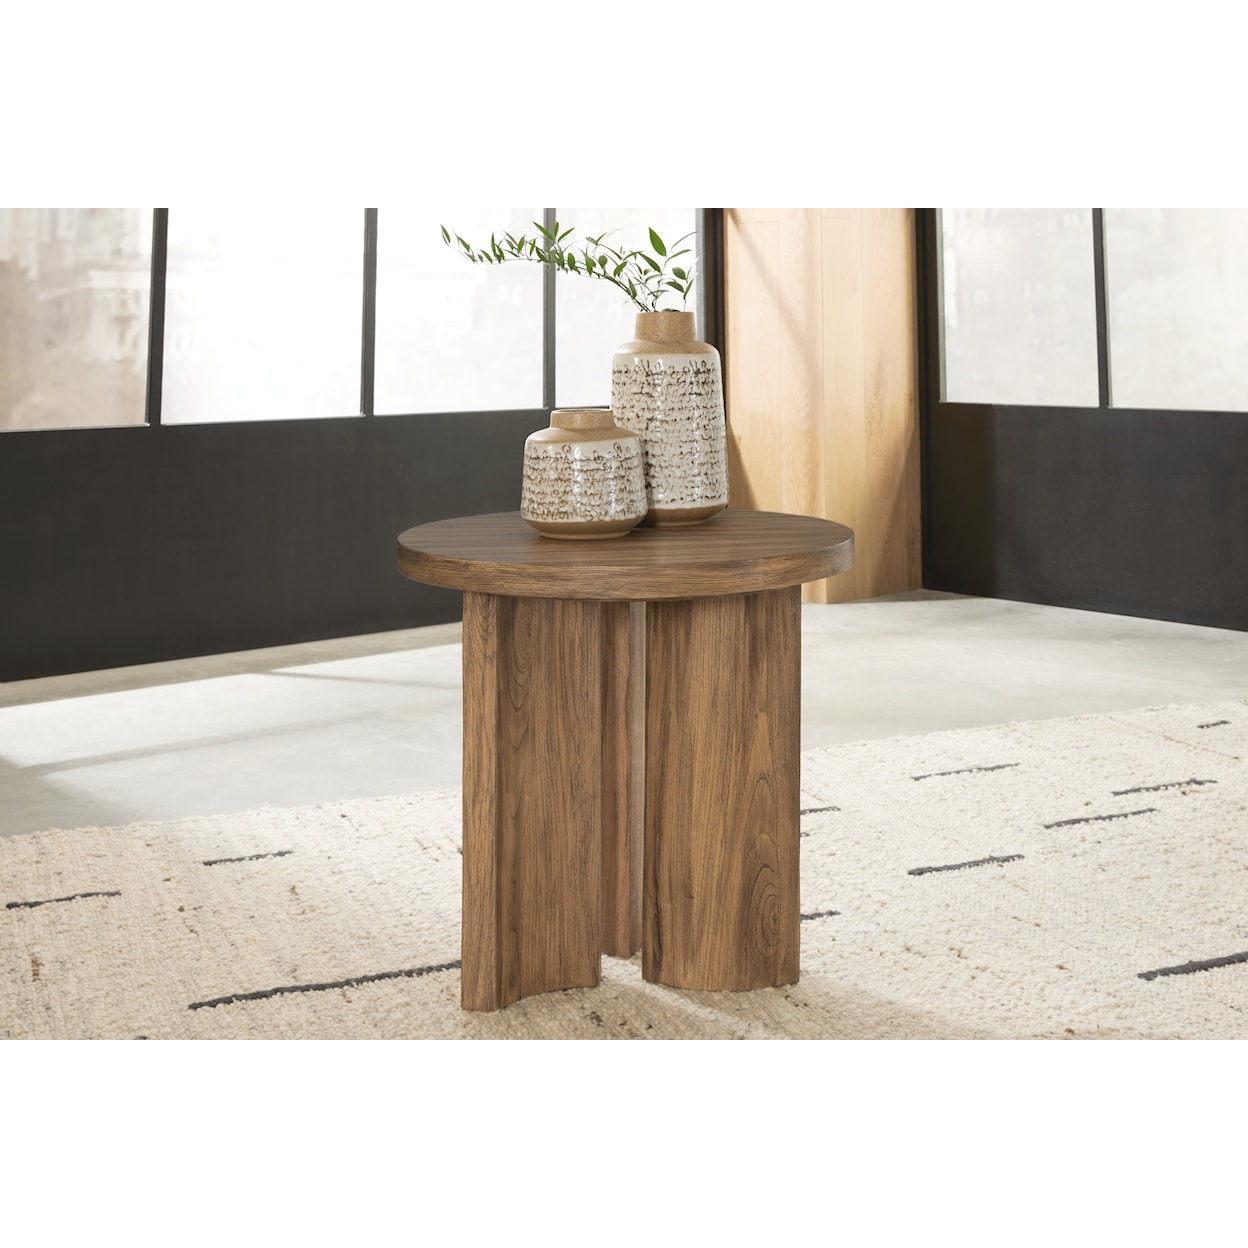 Michael Alan Select Austanny Round End Table